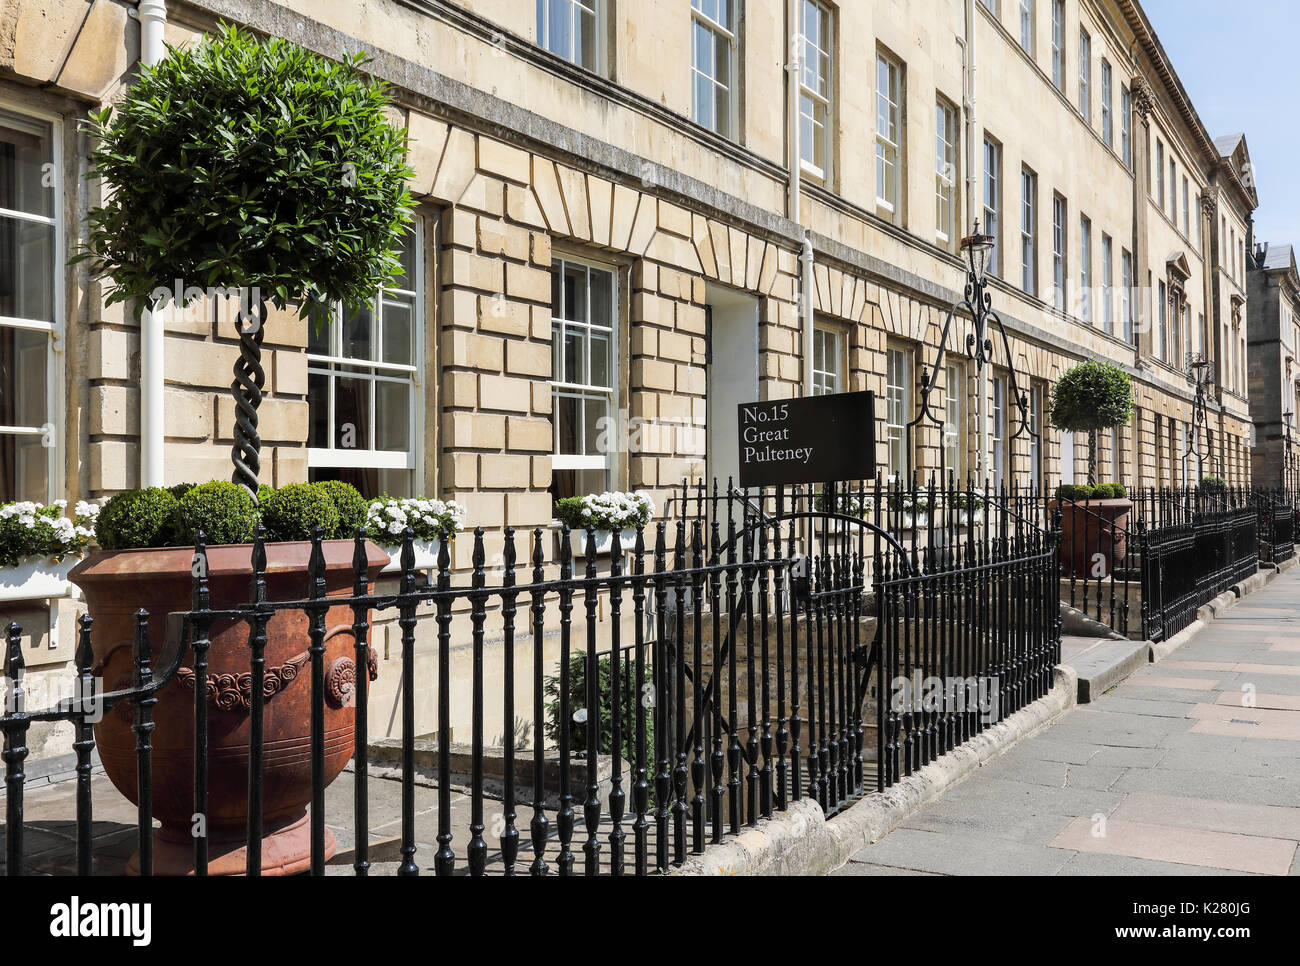 No.15 Great Pulteney Street Boutique Hotel & Spa, Great Pulteney Street, City of Bath, Somerset, England, UK Stock Photo